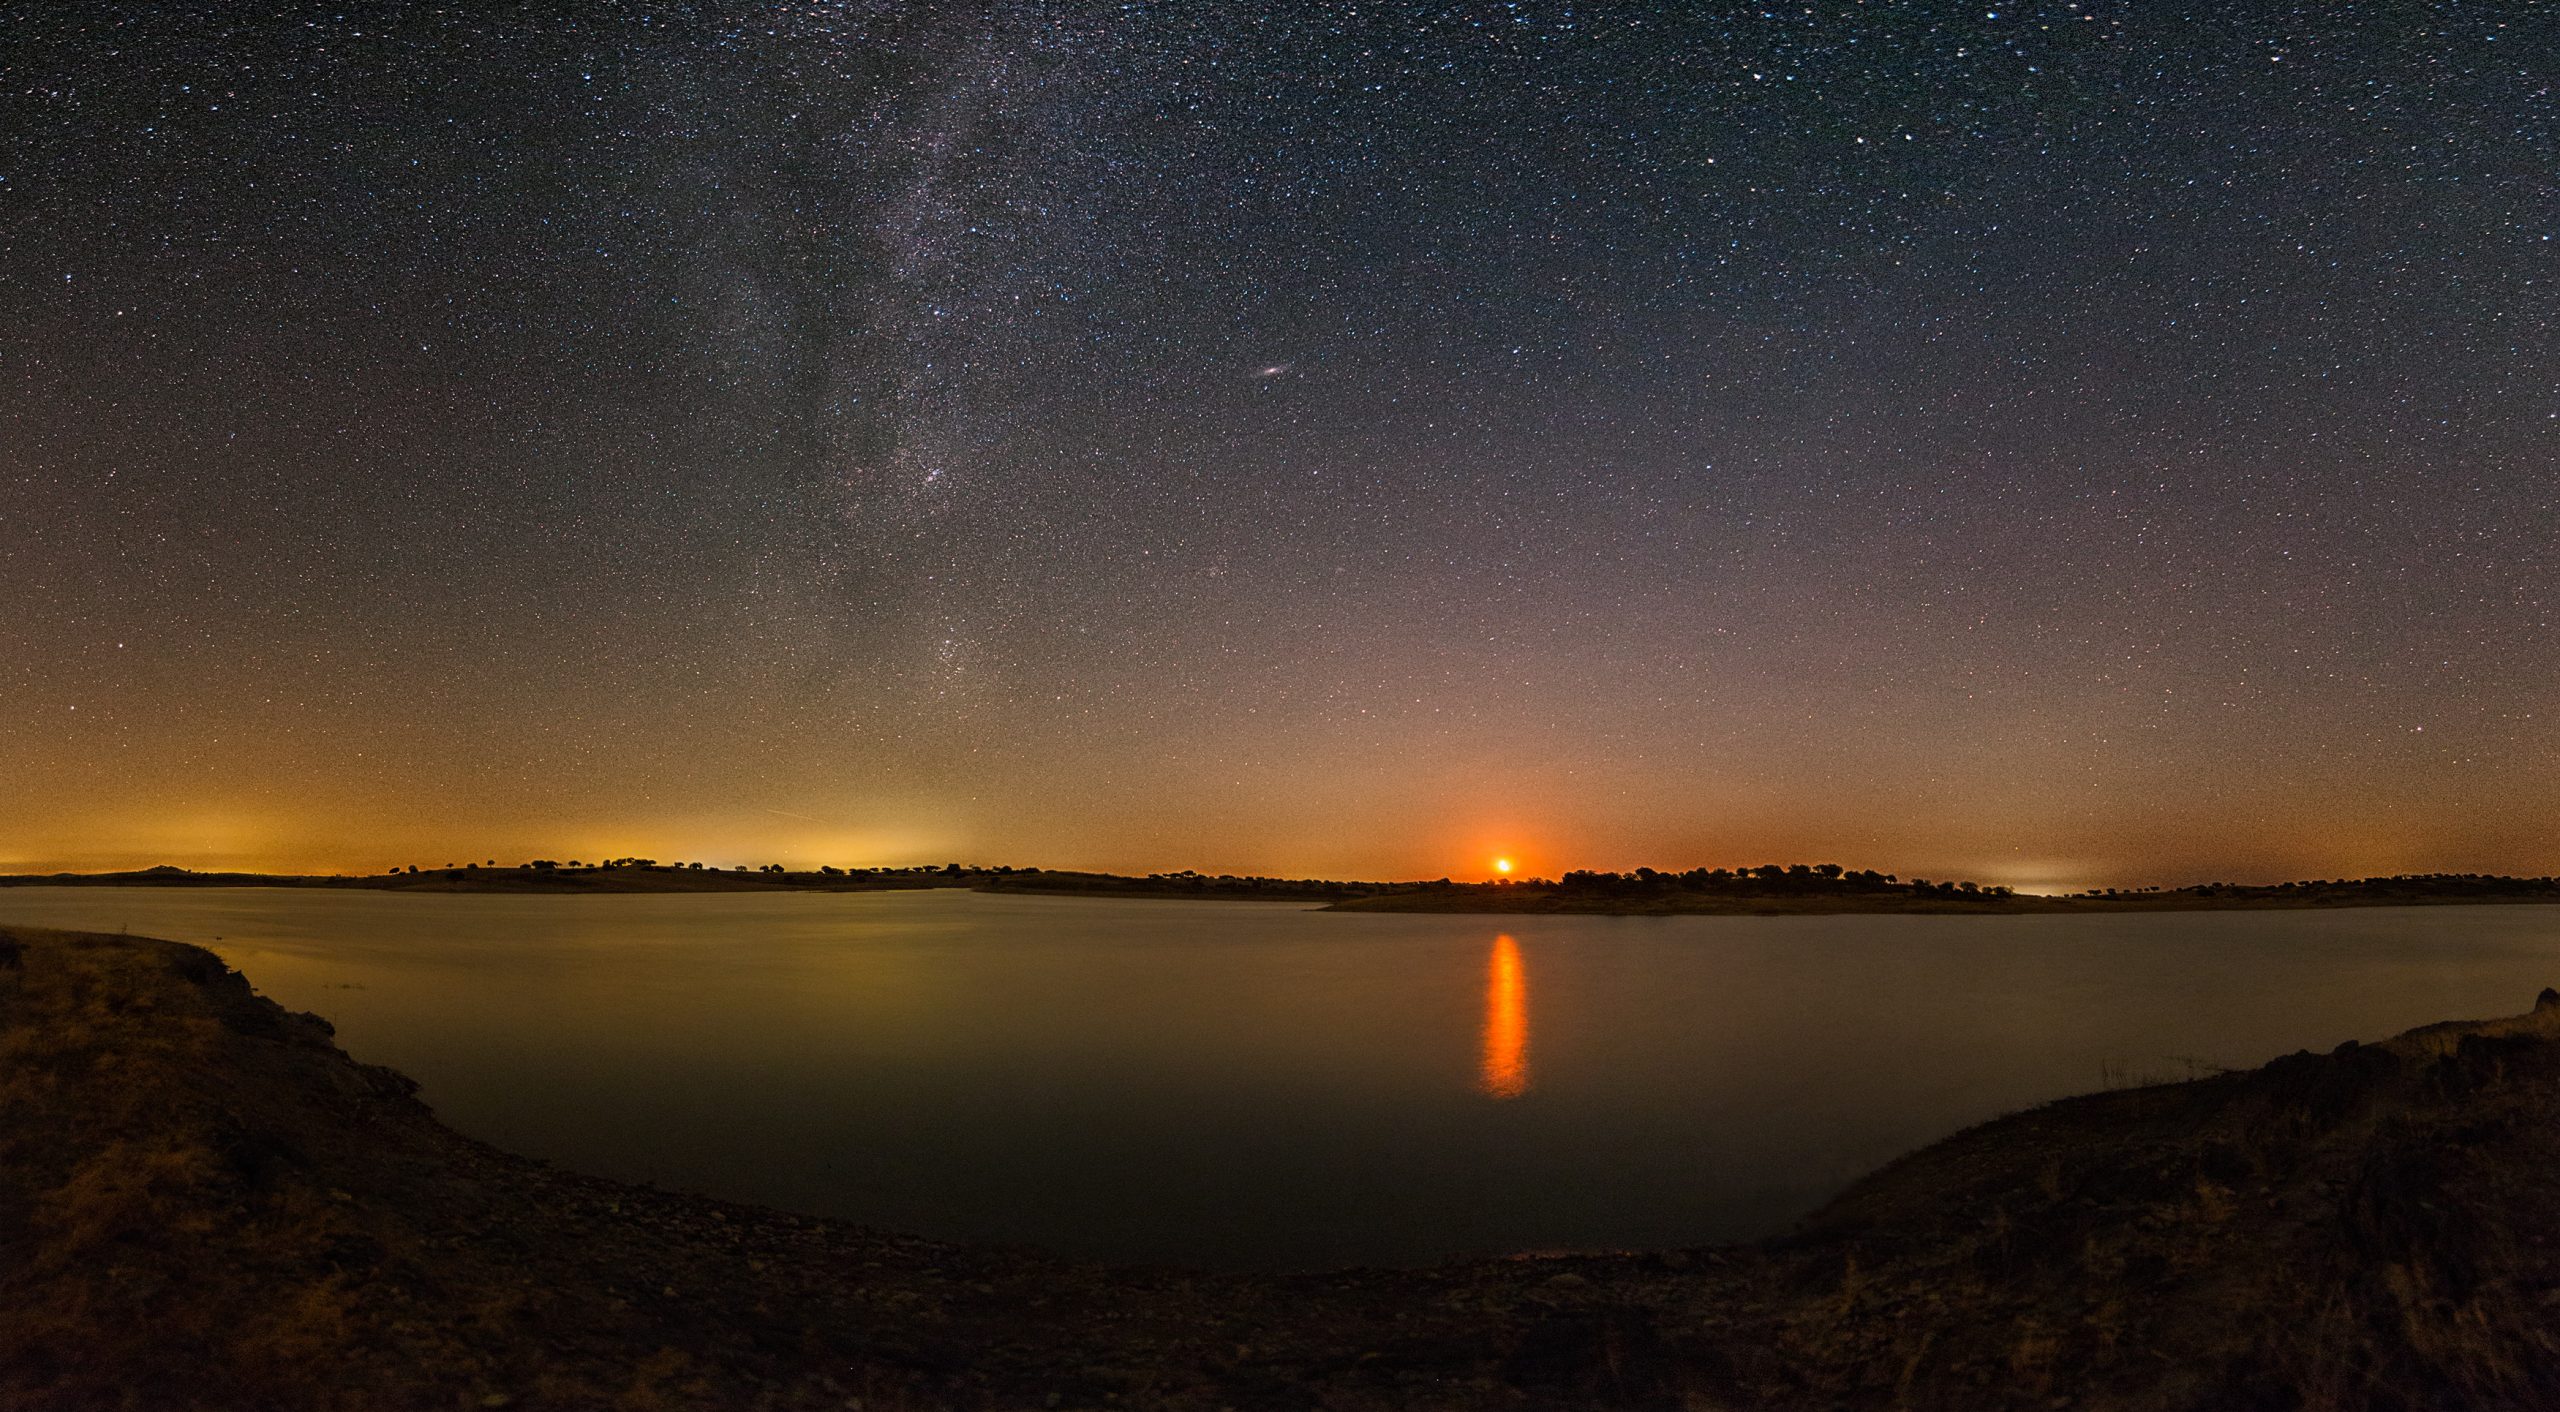 Astrophotography; Nightscapes Photography; Milky Way; e-eye; Extremadura; Alqueva Reservoir